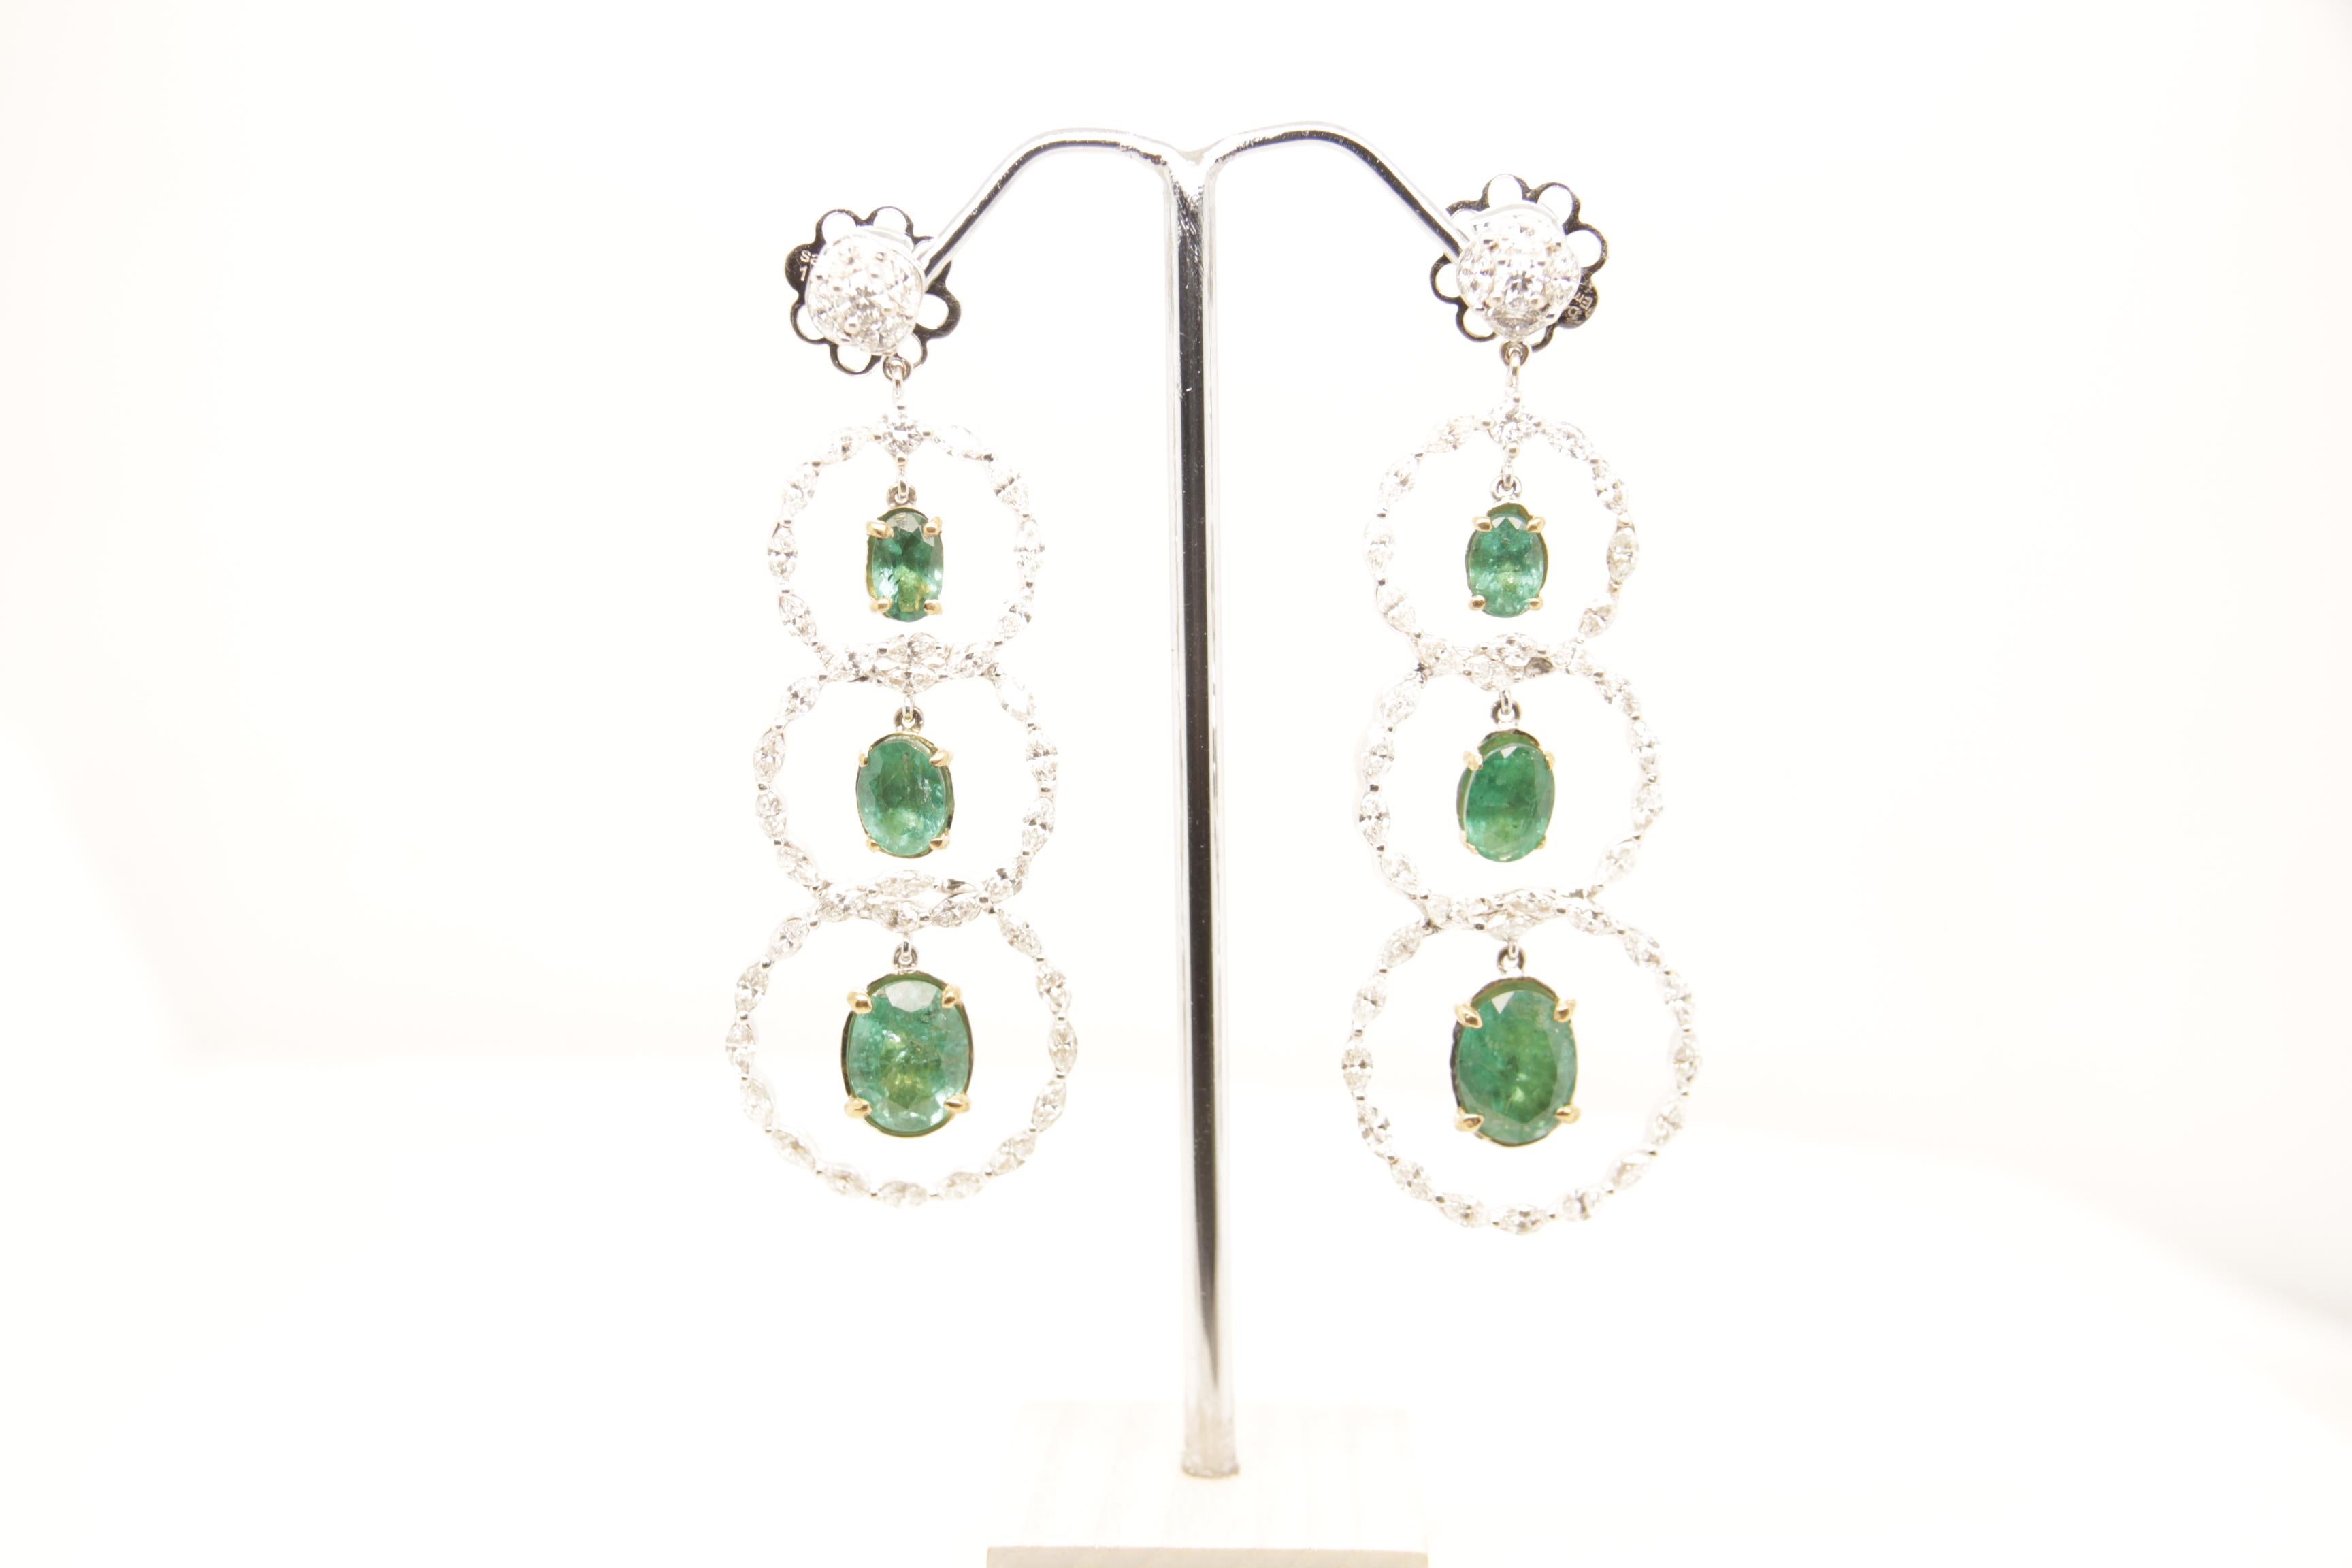 A brand new emerald and diamond earring in 18 karat gold. The total emerald weight is 5.96 carats and total diamond weight is 4.08 carats. The total earrings weight is 15.73 grams.